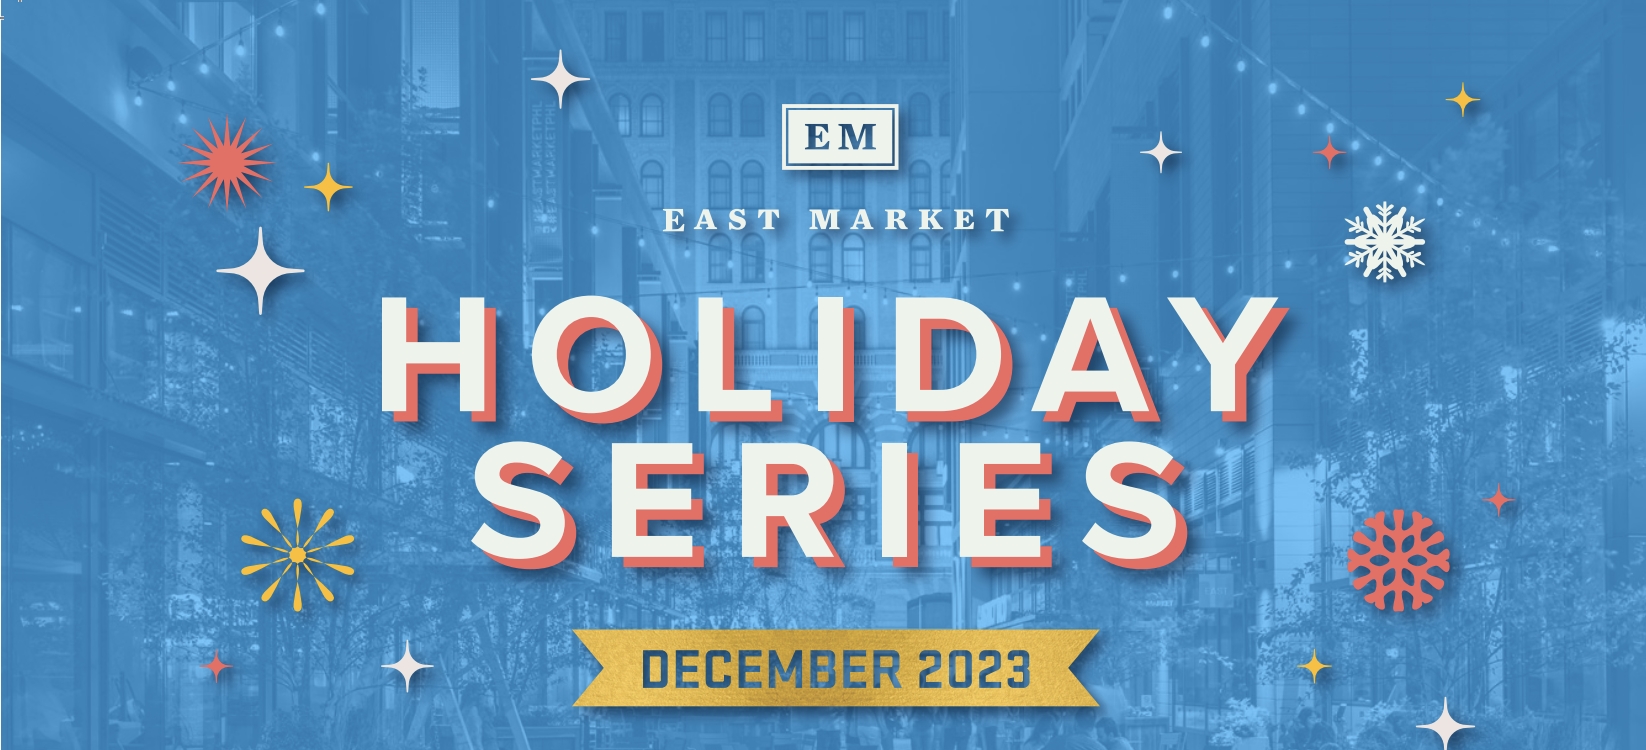 East Market Holiday Series: Crafts, Carols, and Cocktails